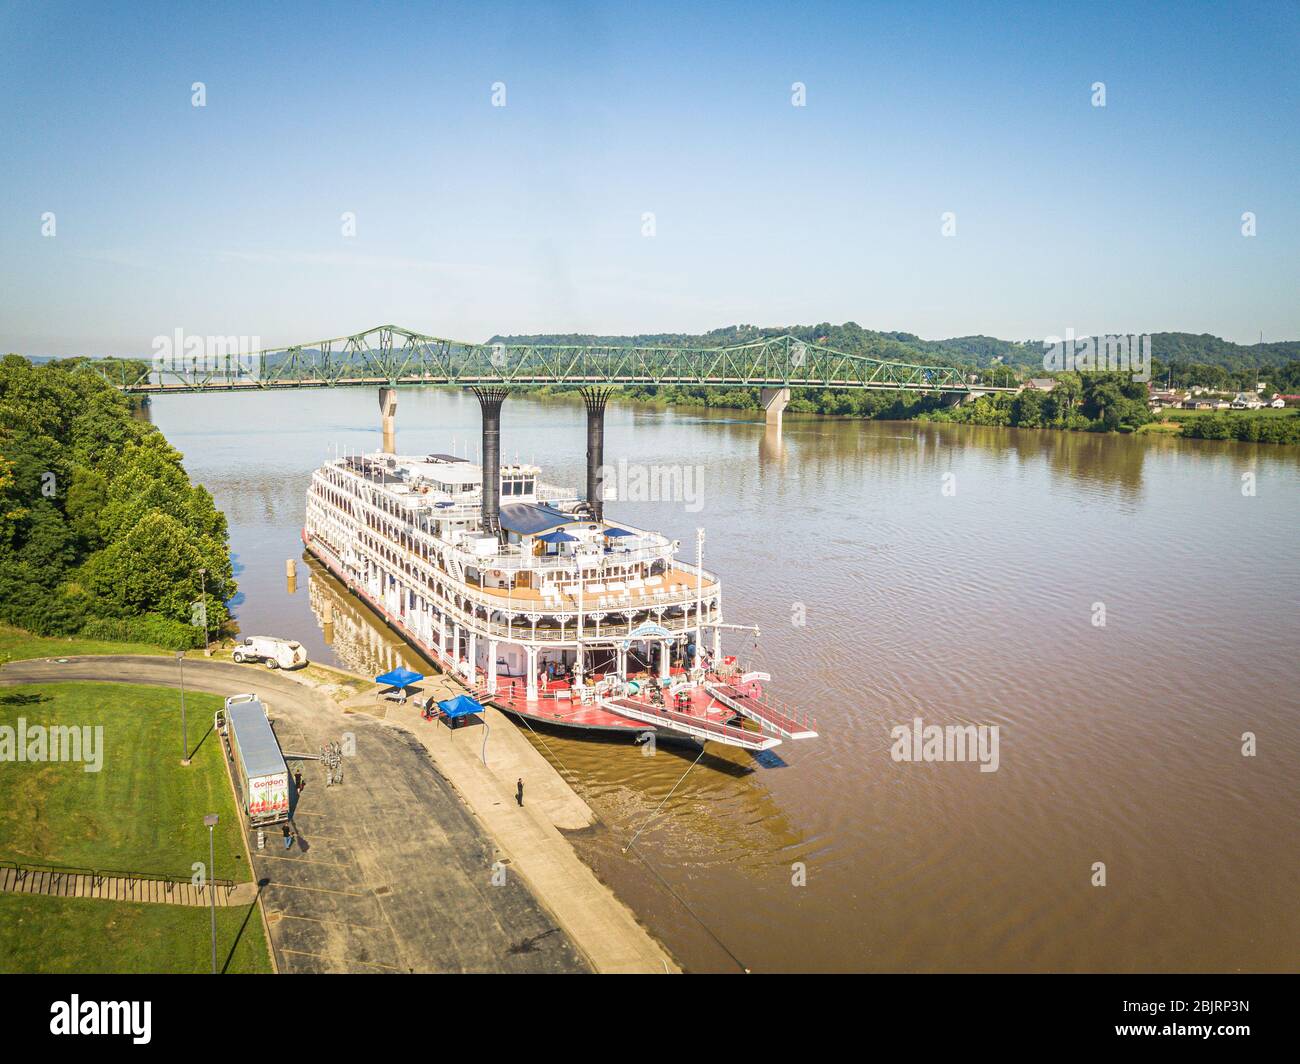 The American Queen sternwheel steamboat rests docked at Harris River Front Park on the Ohio River in Huntington, West Virginia. Stock Photo